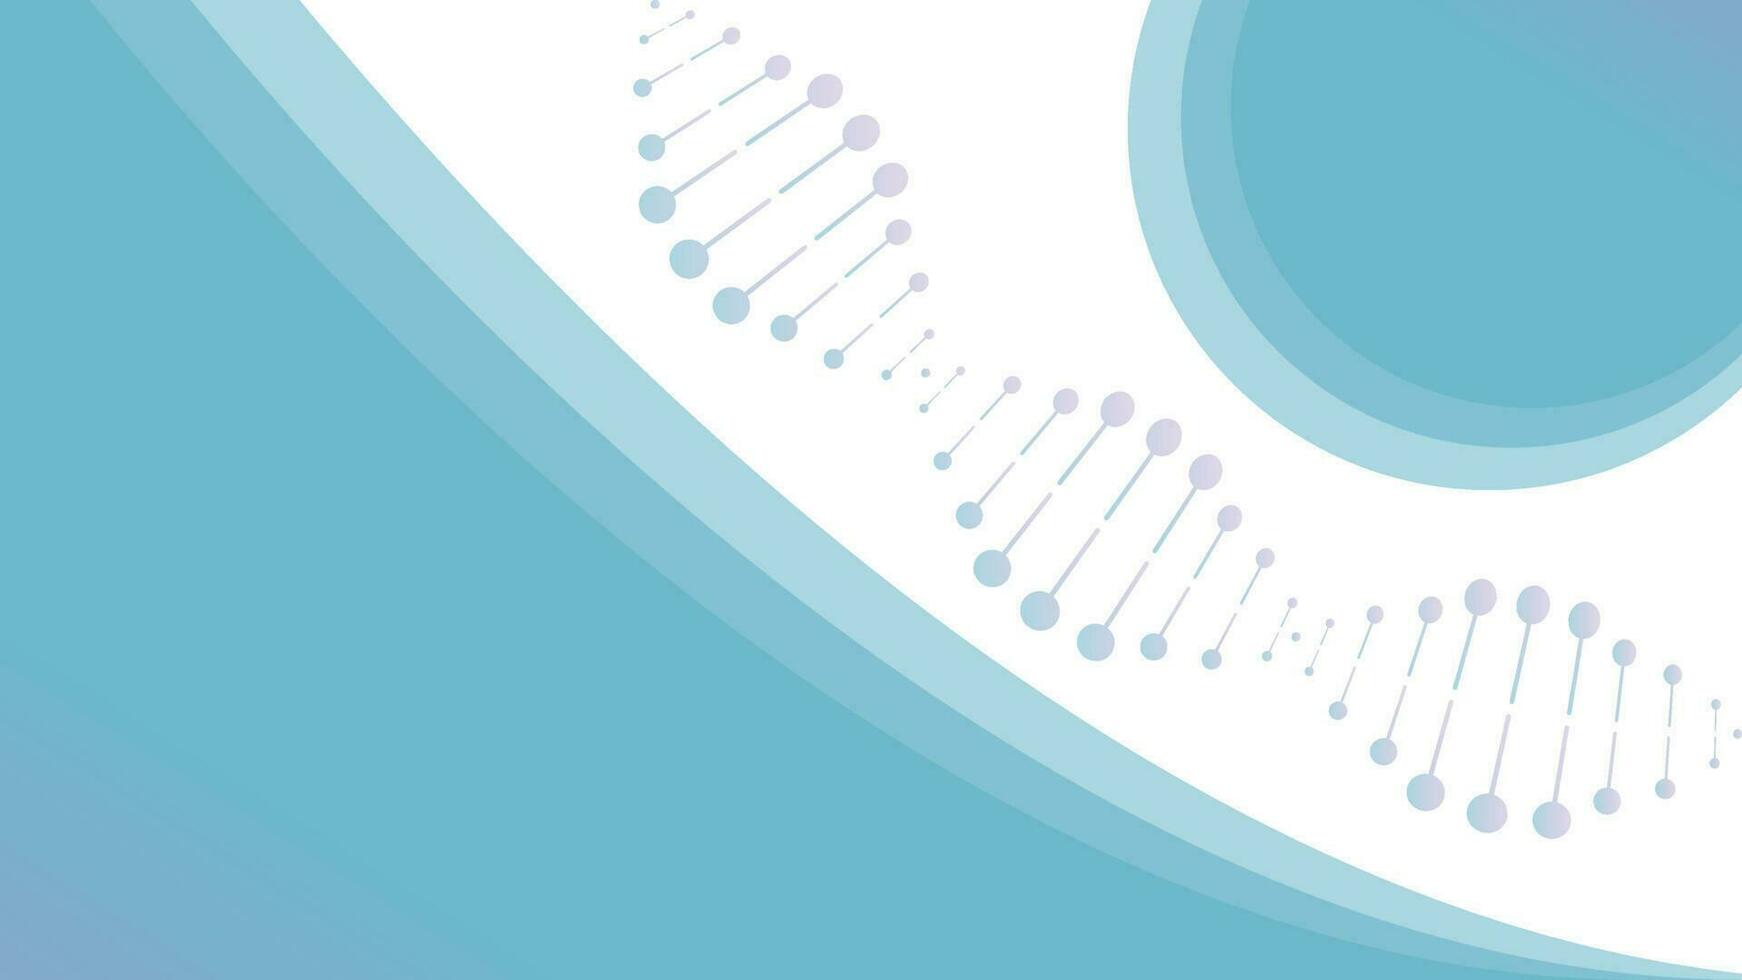 Abstract DNA science background vector illustration